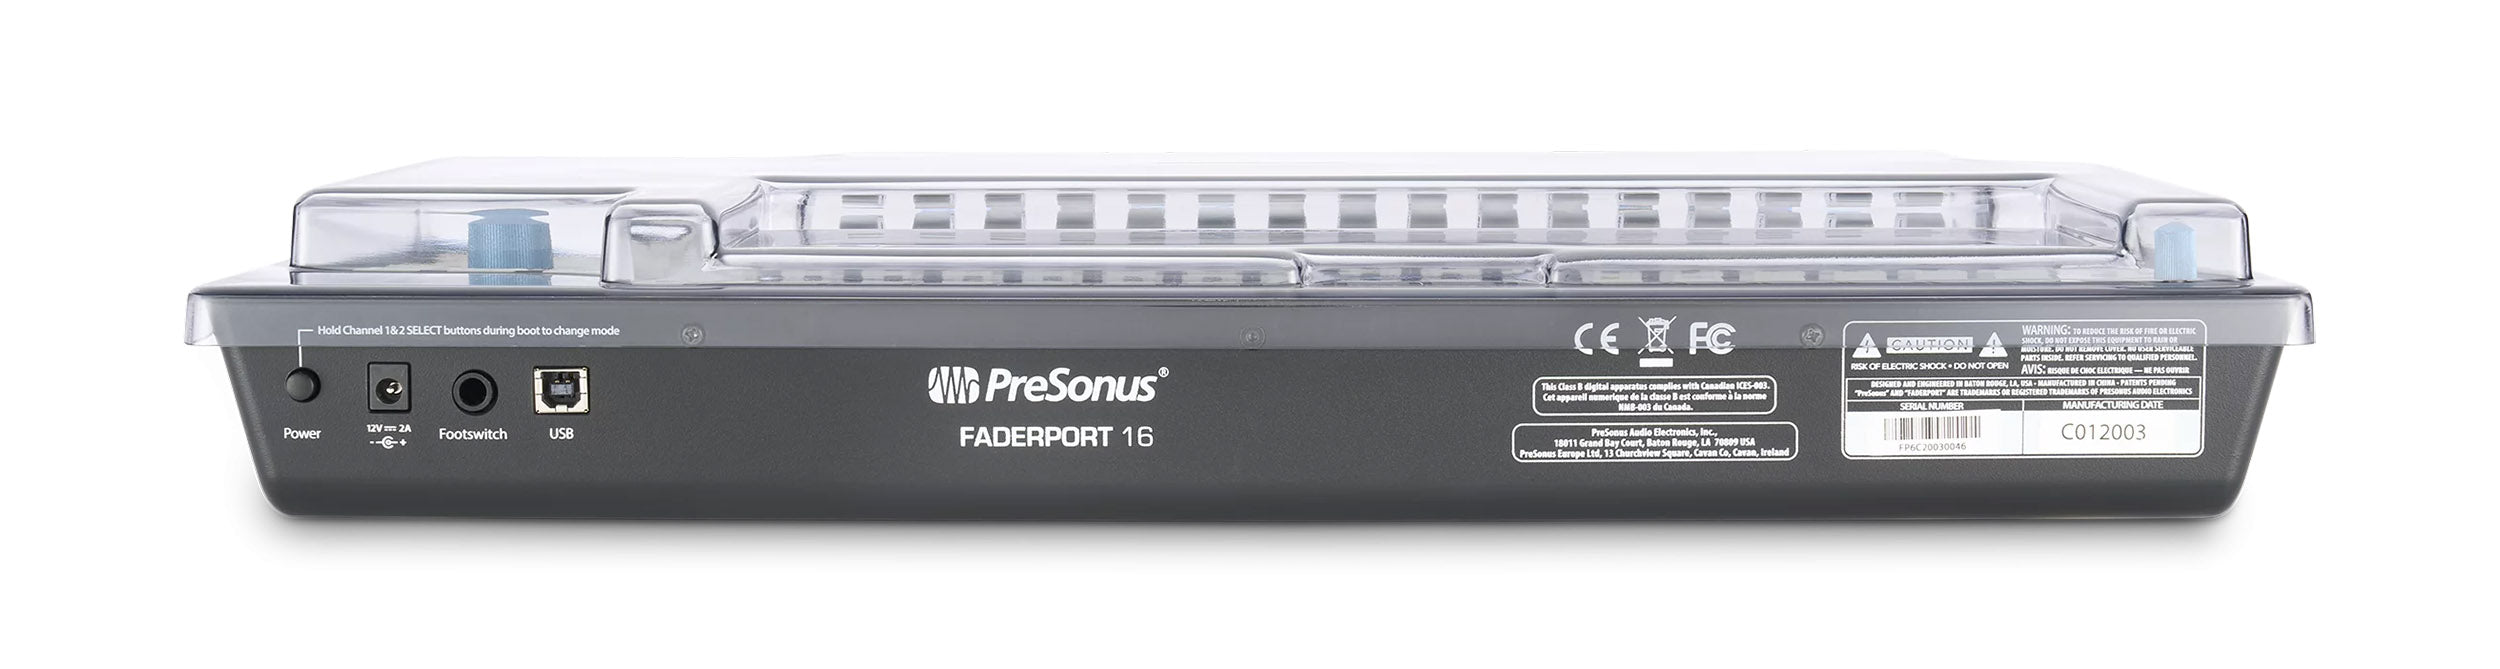 Decksaver DS-PC-FADERPORT16, Protection Cover for Presonus FADERPORT 16 Production Controller by DECKSAVER